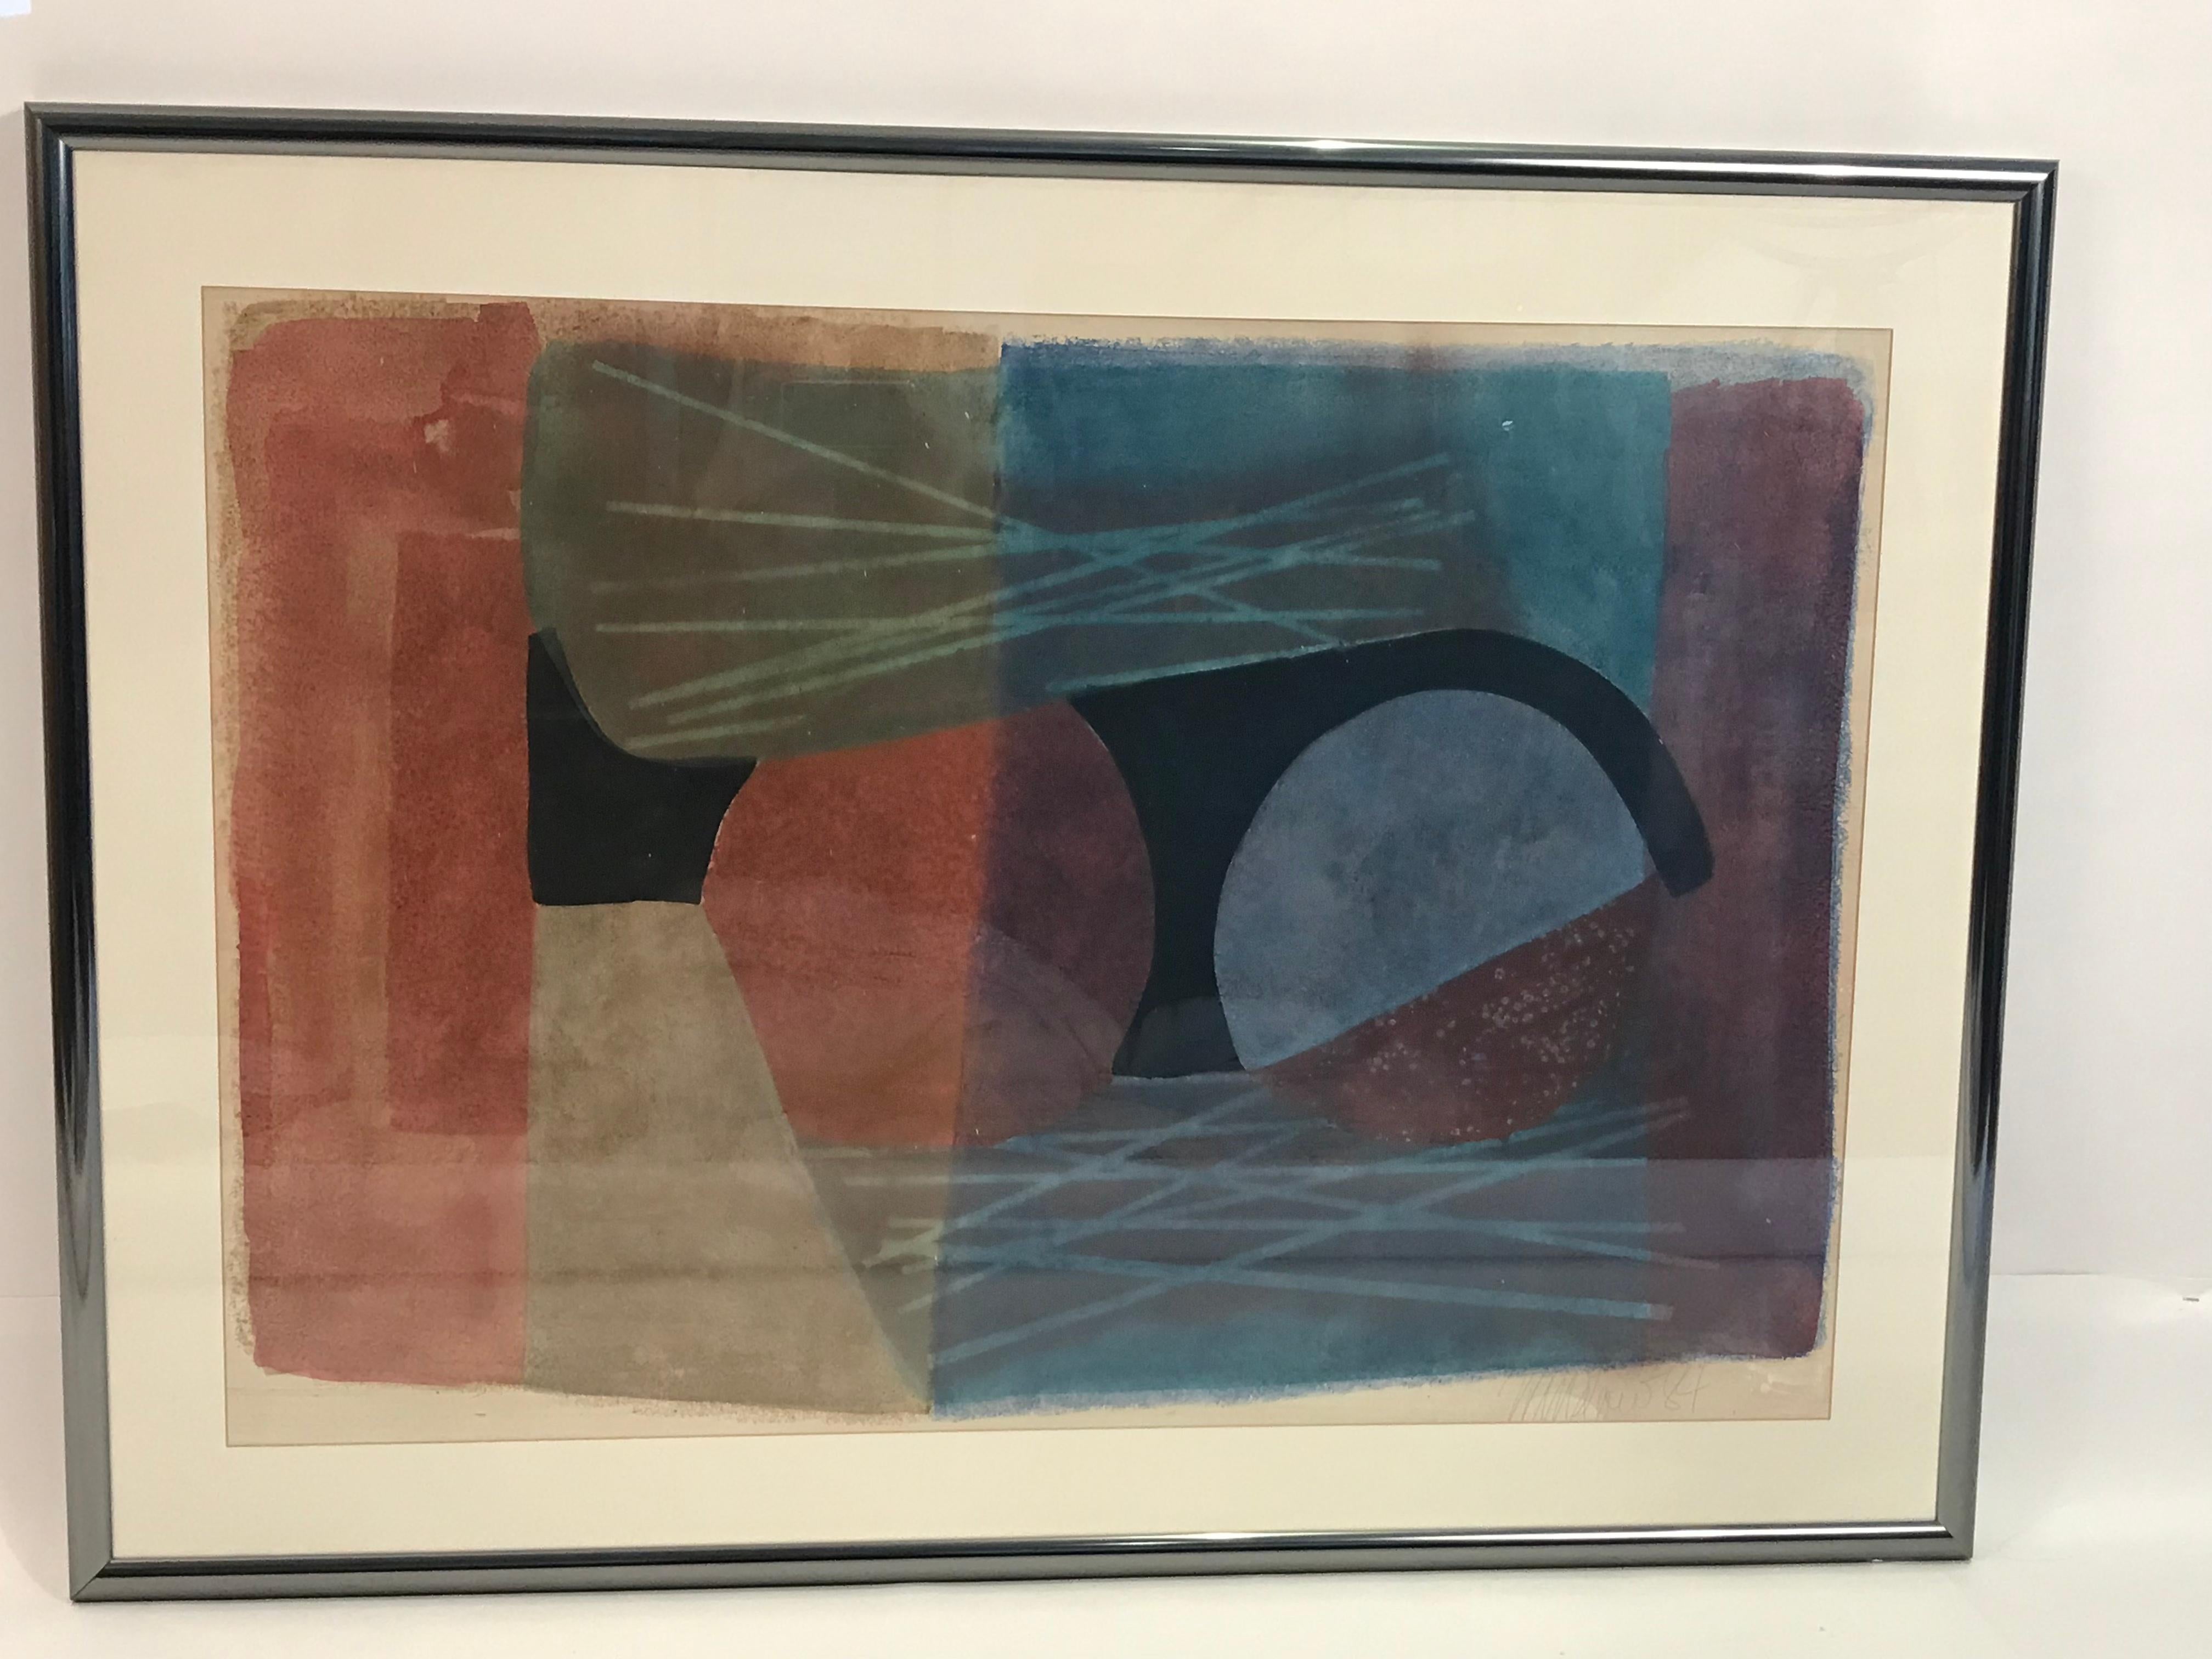 Attract mixed-media composition on paper by Robert Winslow. This painting was created in 1984. Winslow is also well known for his sculpture.
From the art collection of an international corporation. Prior labels to the verso.

Bio from the